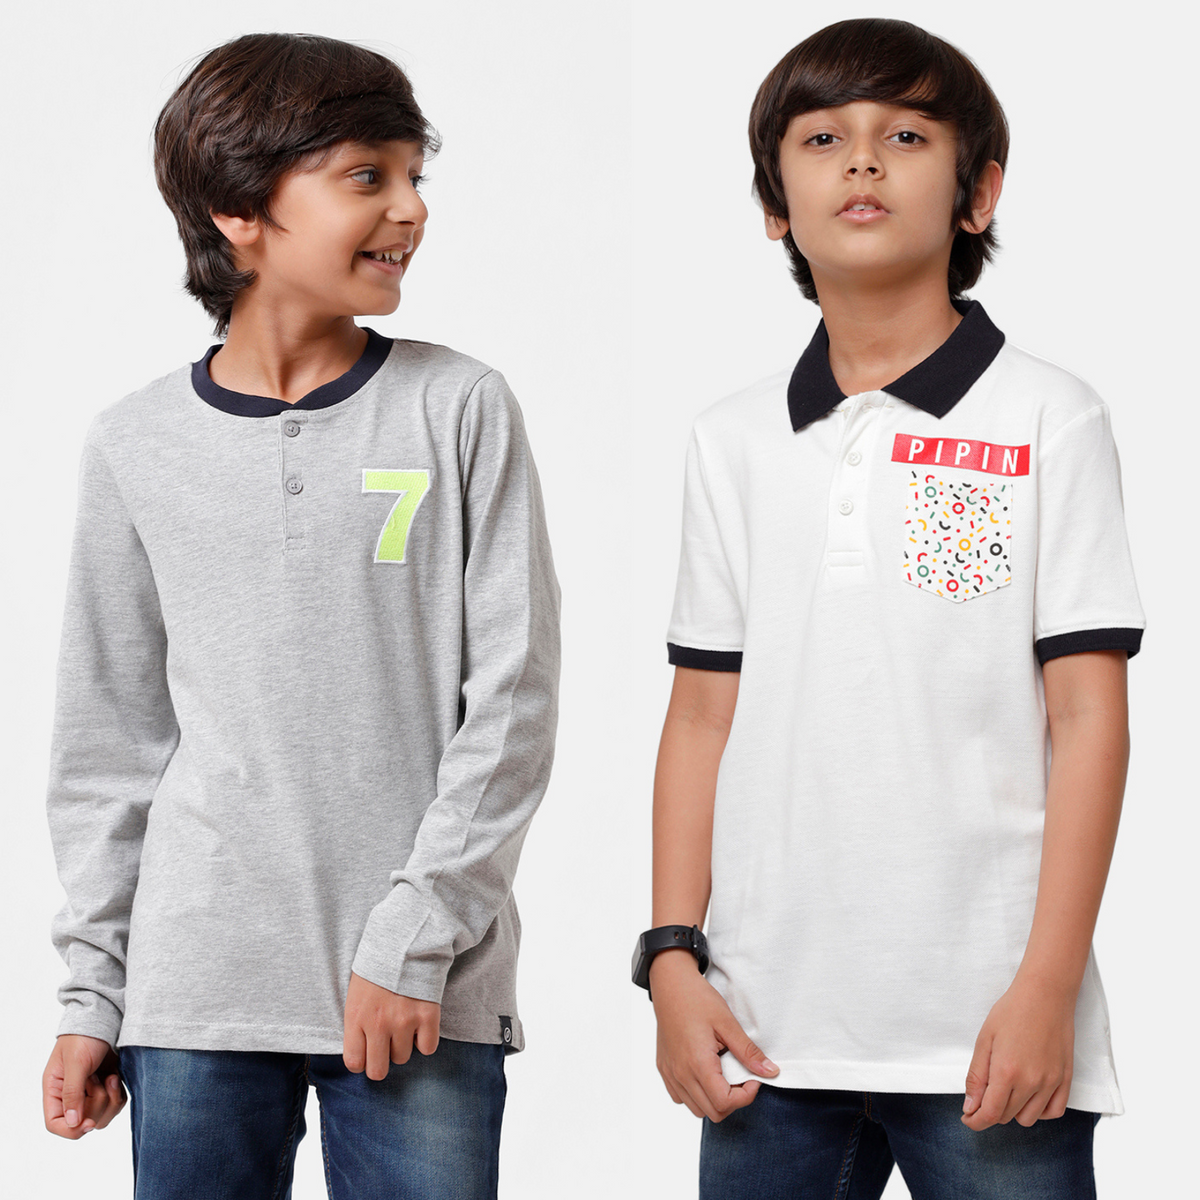 Pack of 2 Pipin Boys T-shirt Offwhite & Grey Melange